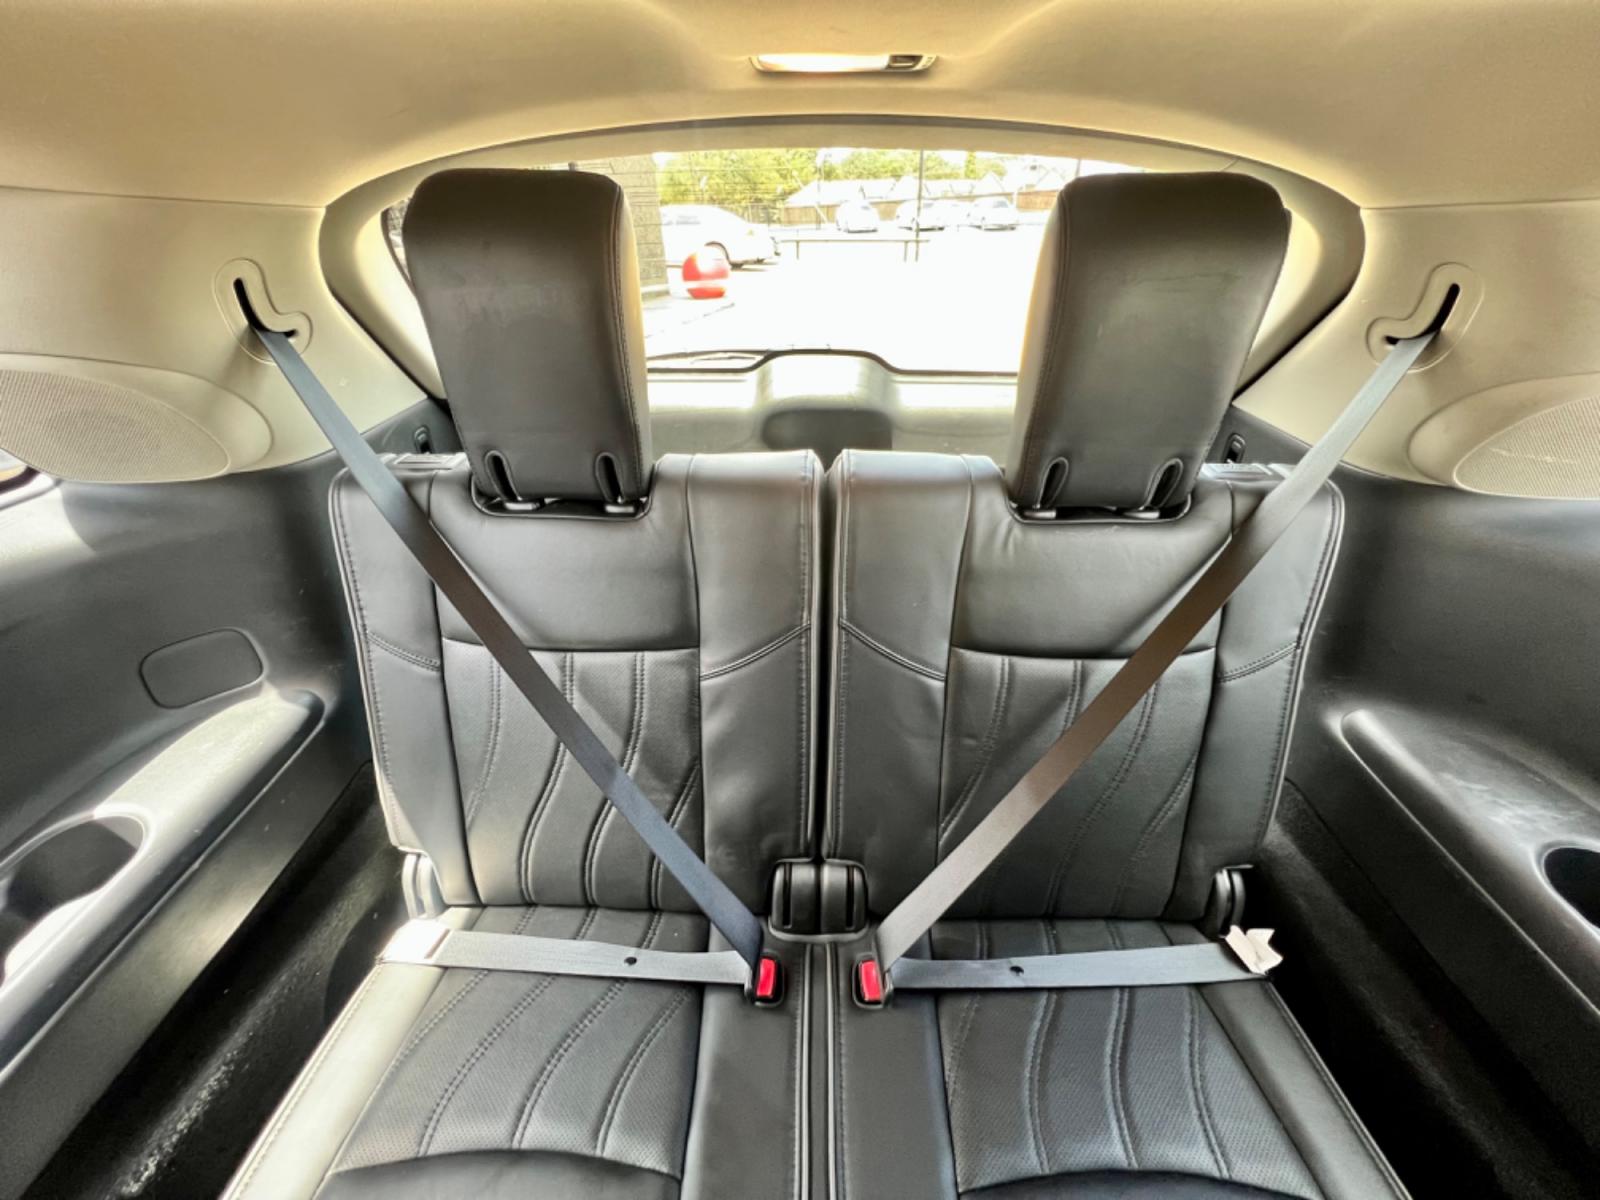 2013 SILVER INFINITI JX35 (5N1AL0MM3DC) , located at 5900 E. Lancaster Ave., Fort Worth, TX, 76112, (817) 457-5456, 0.000000, 0.000000 - This is a 2013 INFINITI JX35 4 DOOR SUV that is in excellent condition. There are no dents or scratches. The interior is clean with no rips or tears or stains. All power windows, door locks and seats. Ice cold AC for those hot Texas summer days. It is equipped with a CD player, AM/FM radio, AUX port - Photo #15